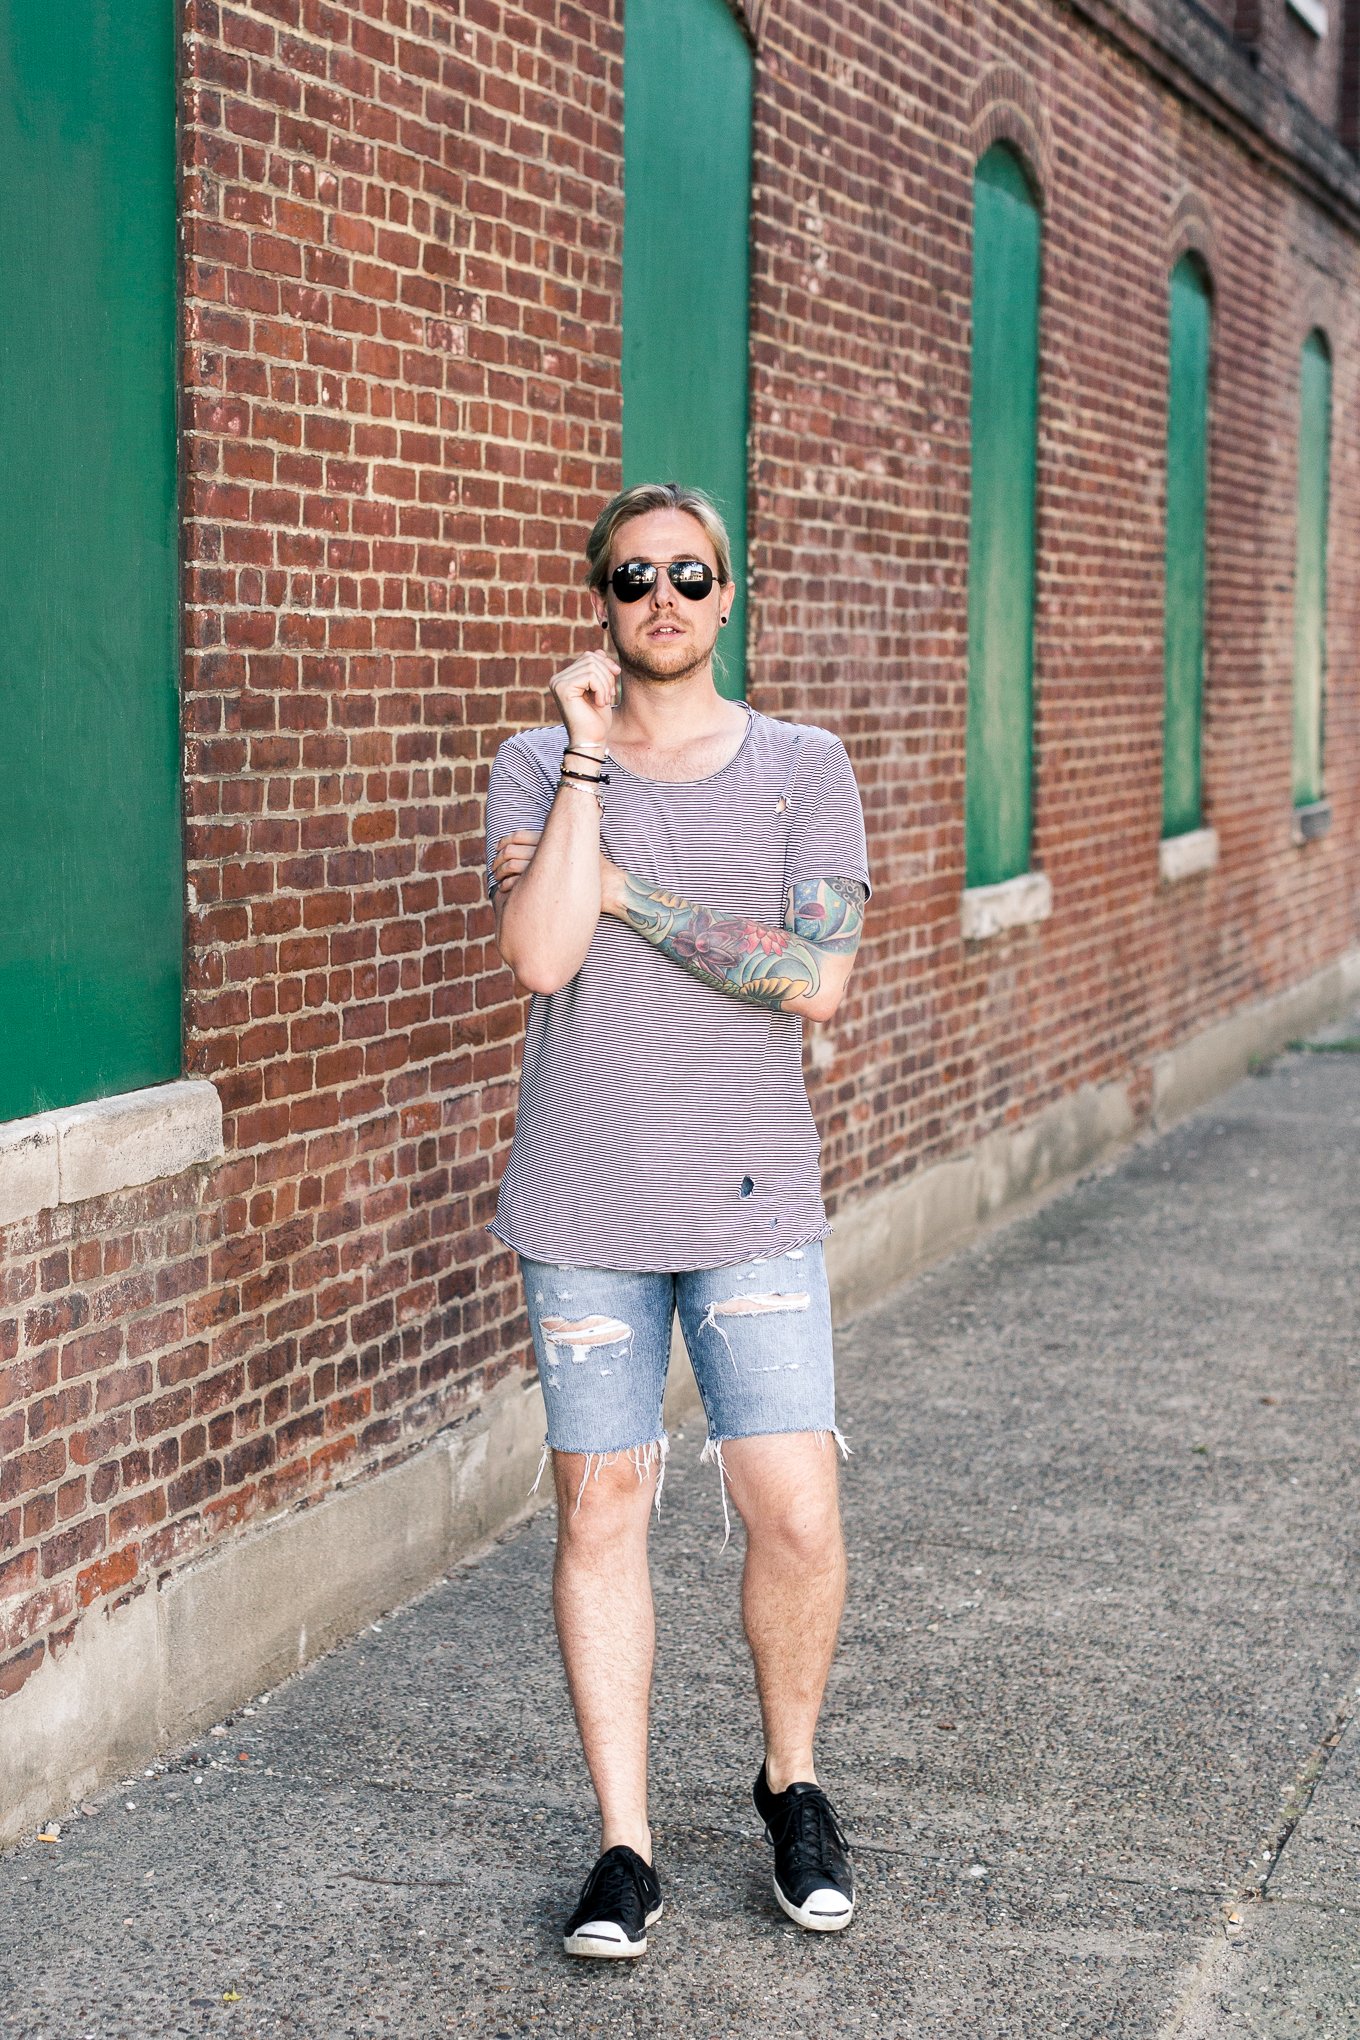 hm mens clothing, mens summer clothing, the kentucky gent, mens style blogger, kentucky blogger